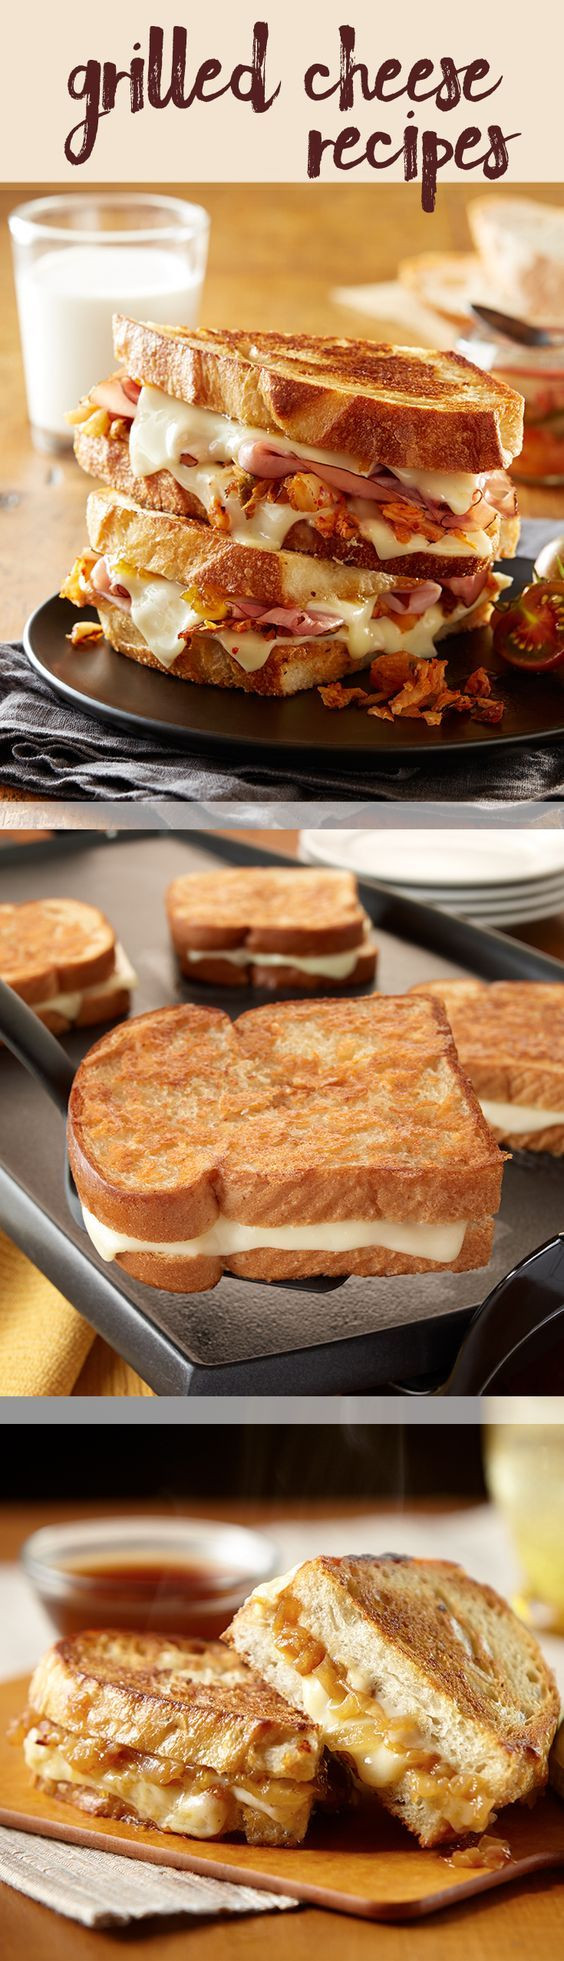 Best Cheese For Grilled Cheese Sandwiches
 Best Grilled Cheese Sandwiches Recipes